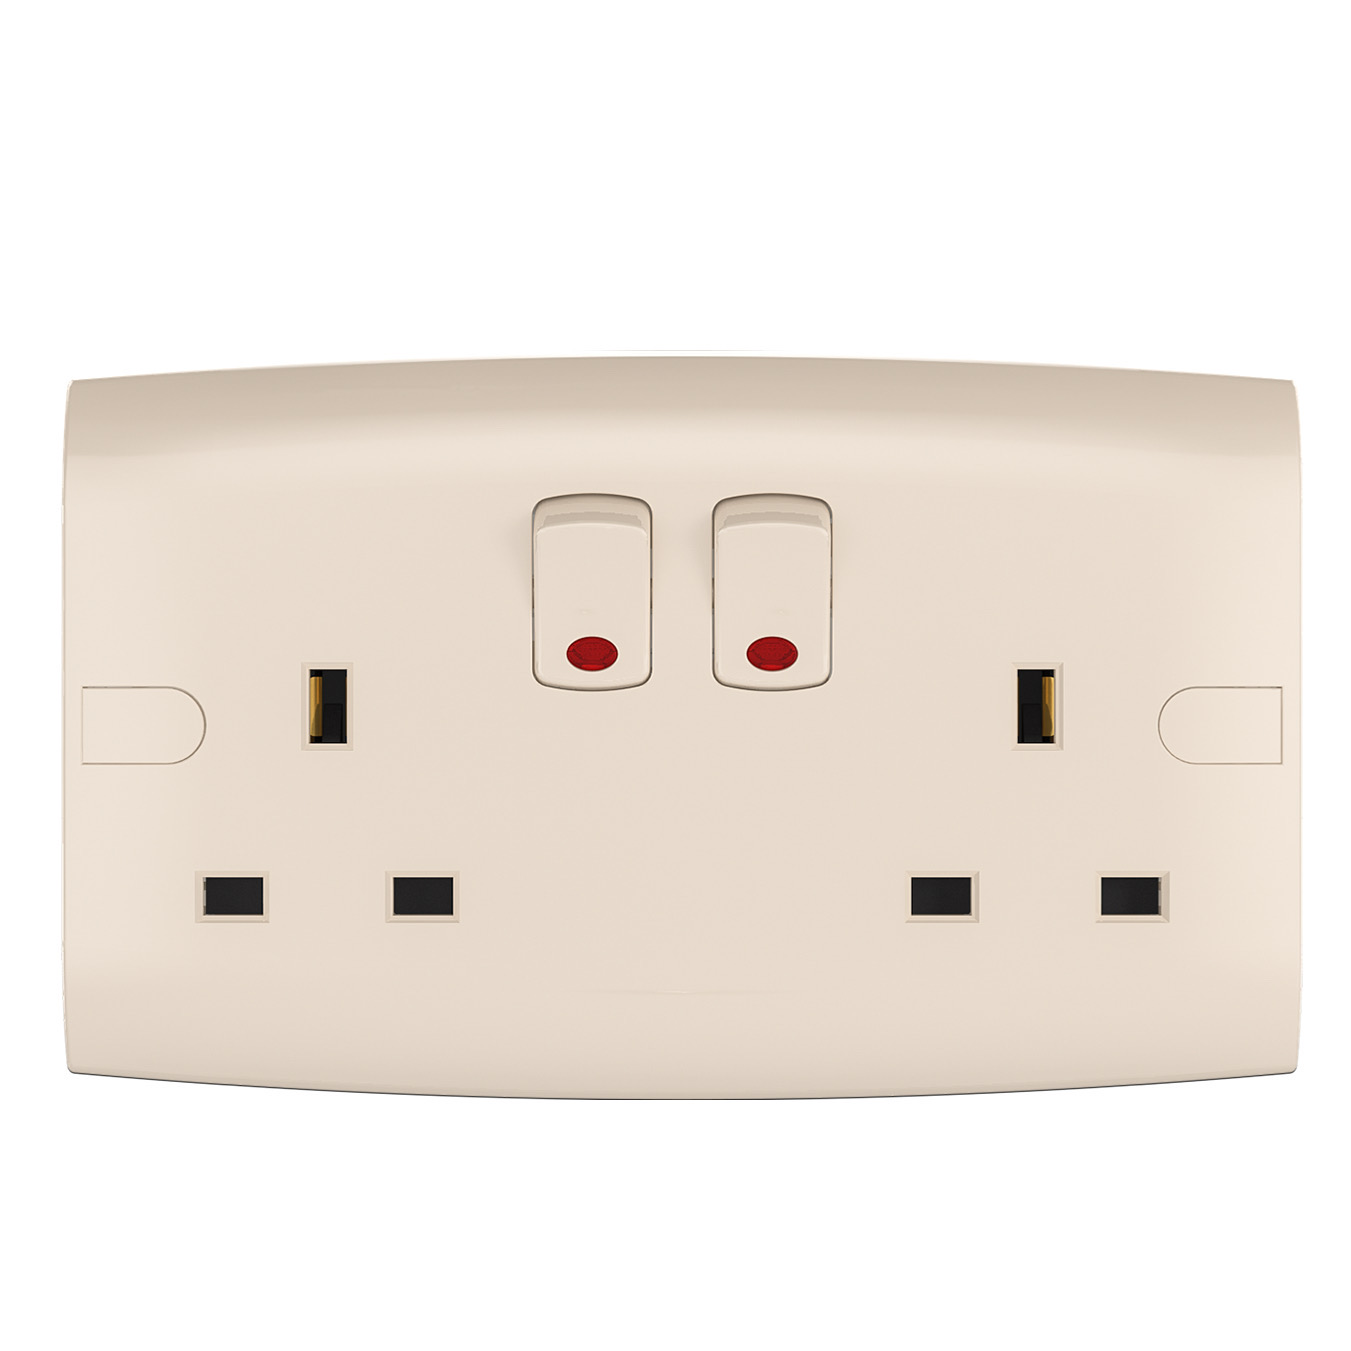 UK STANDARD WALL SWITCHES AND SOCKETS